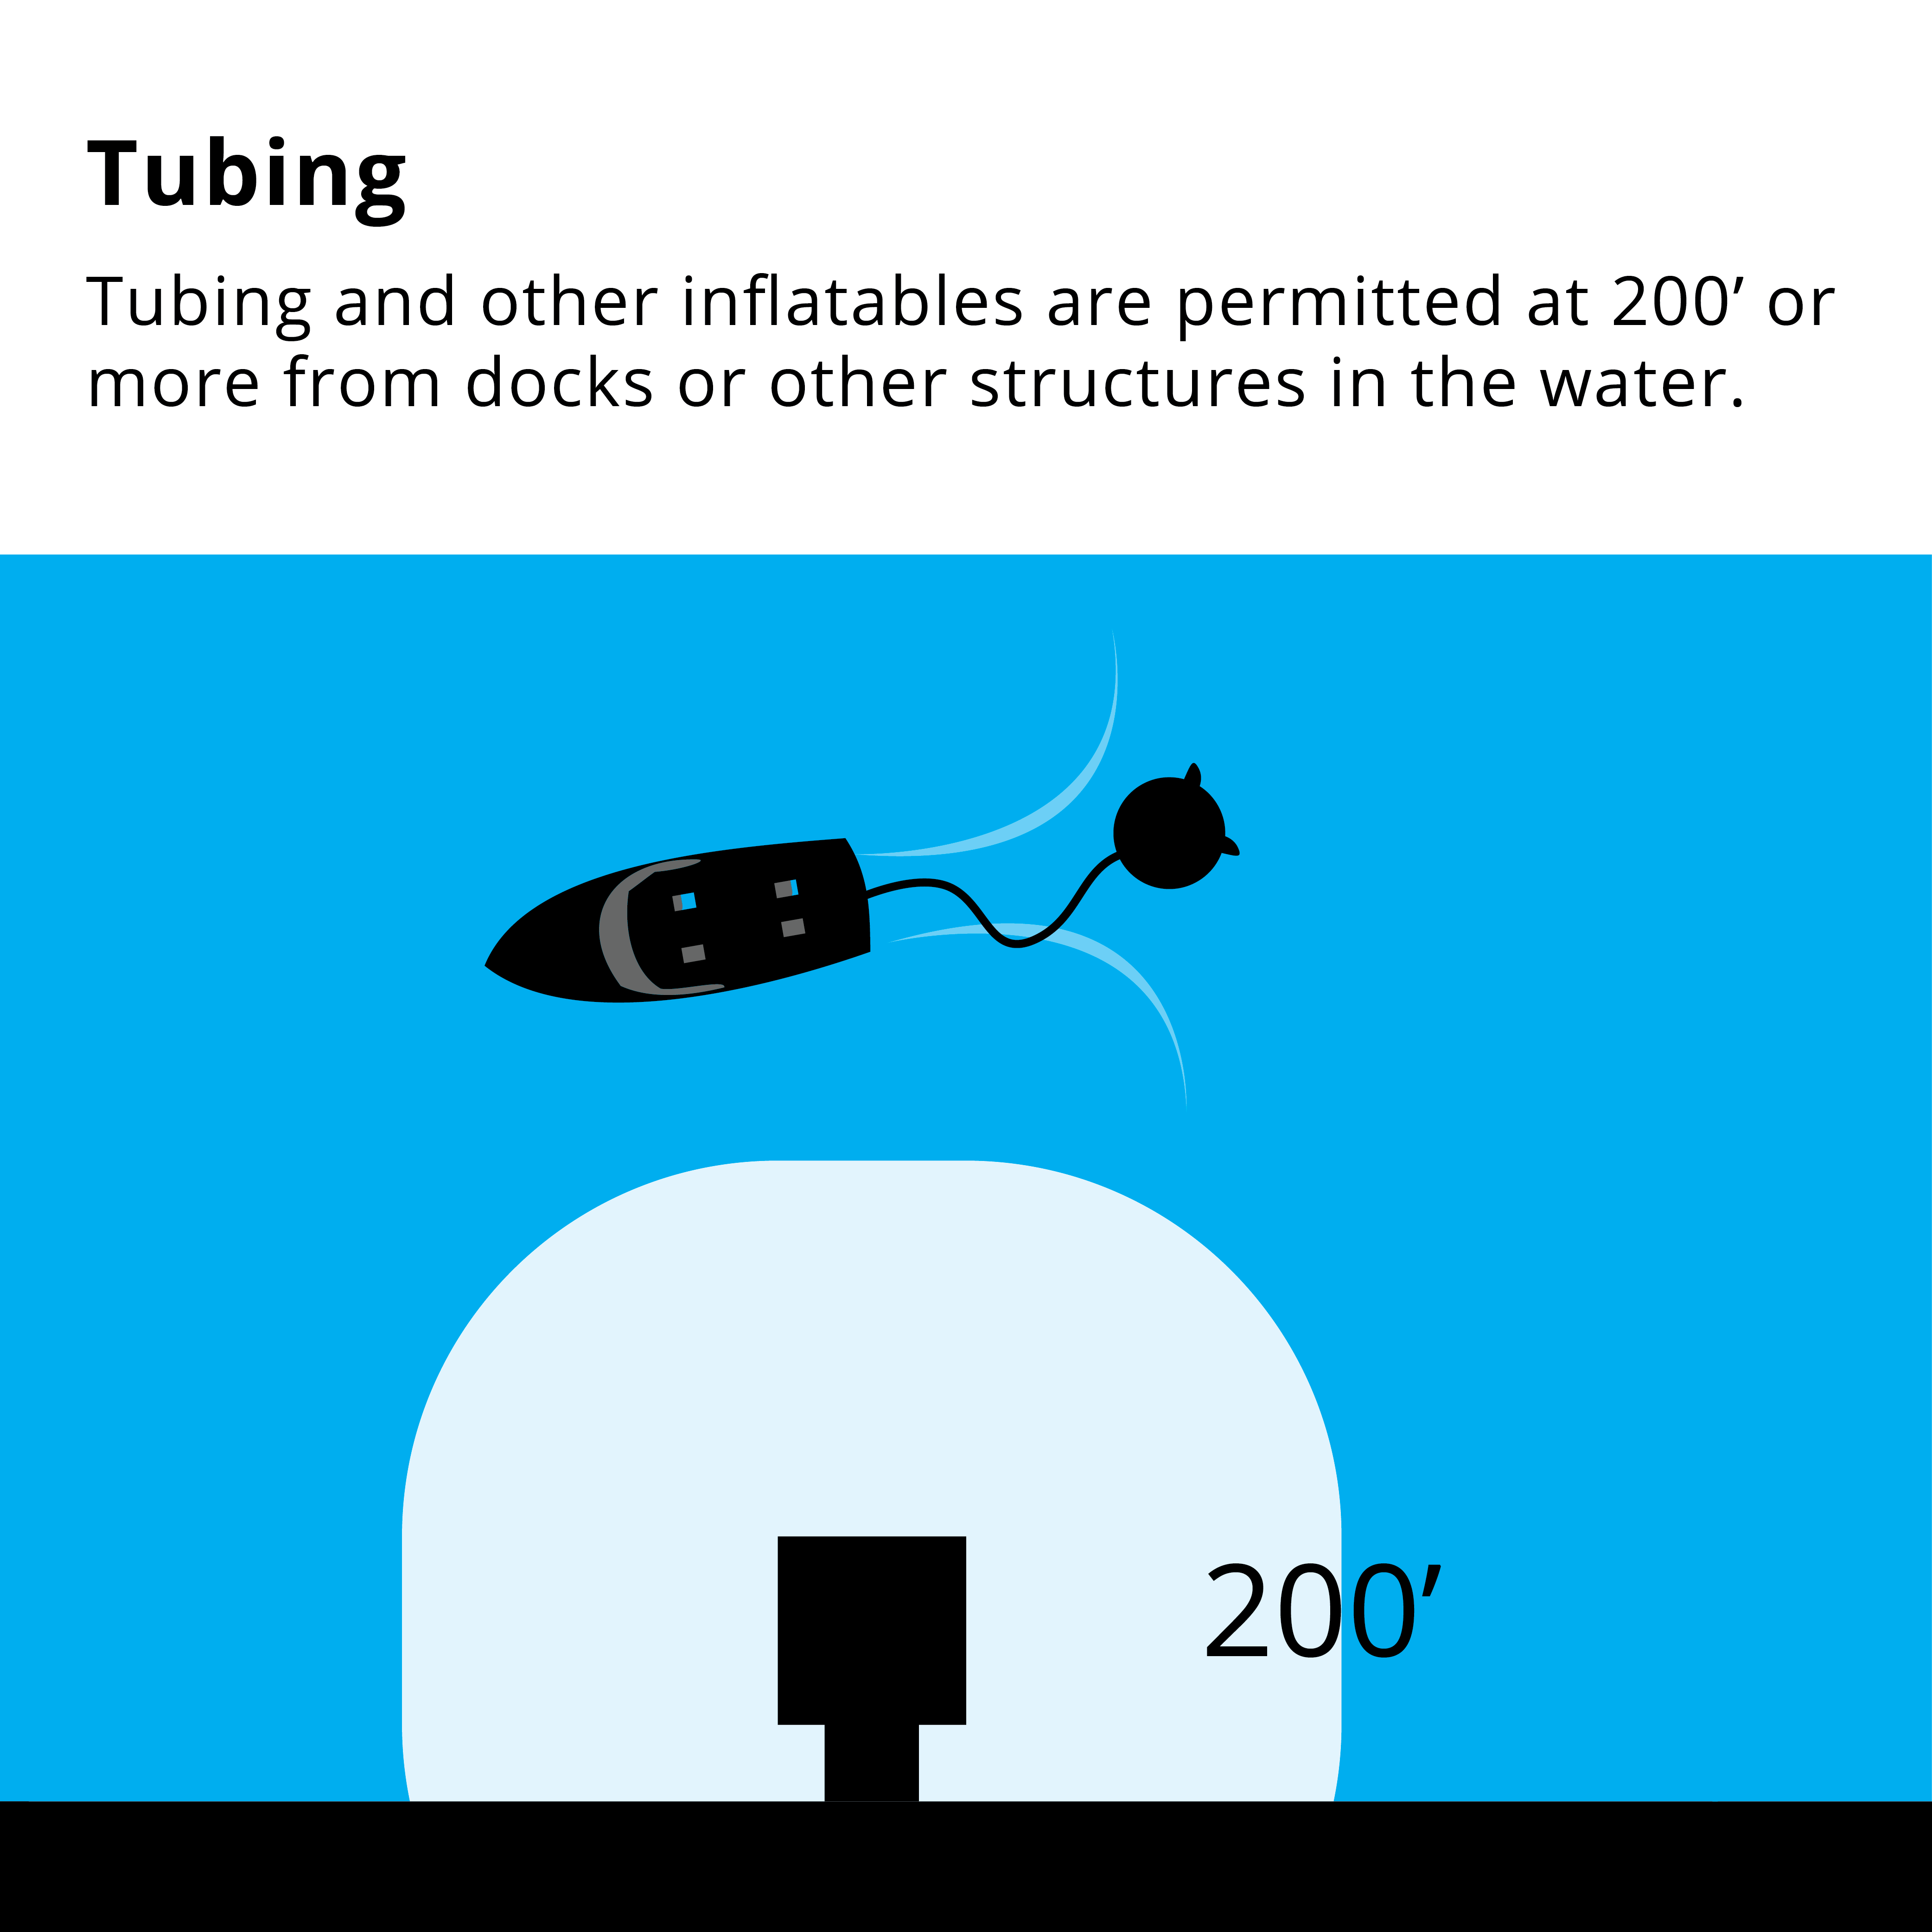 Tubing and other inflatable devices are allowed to operate within 200 feet or more from docks and other structures